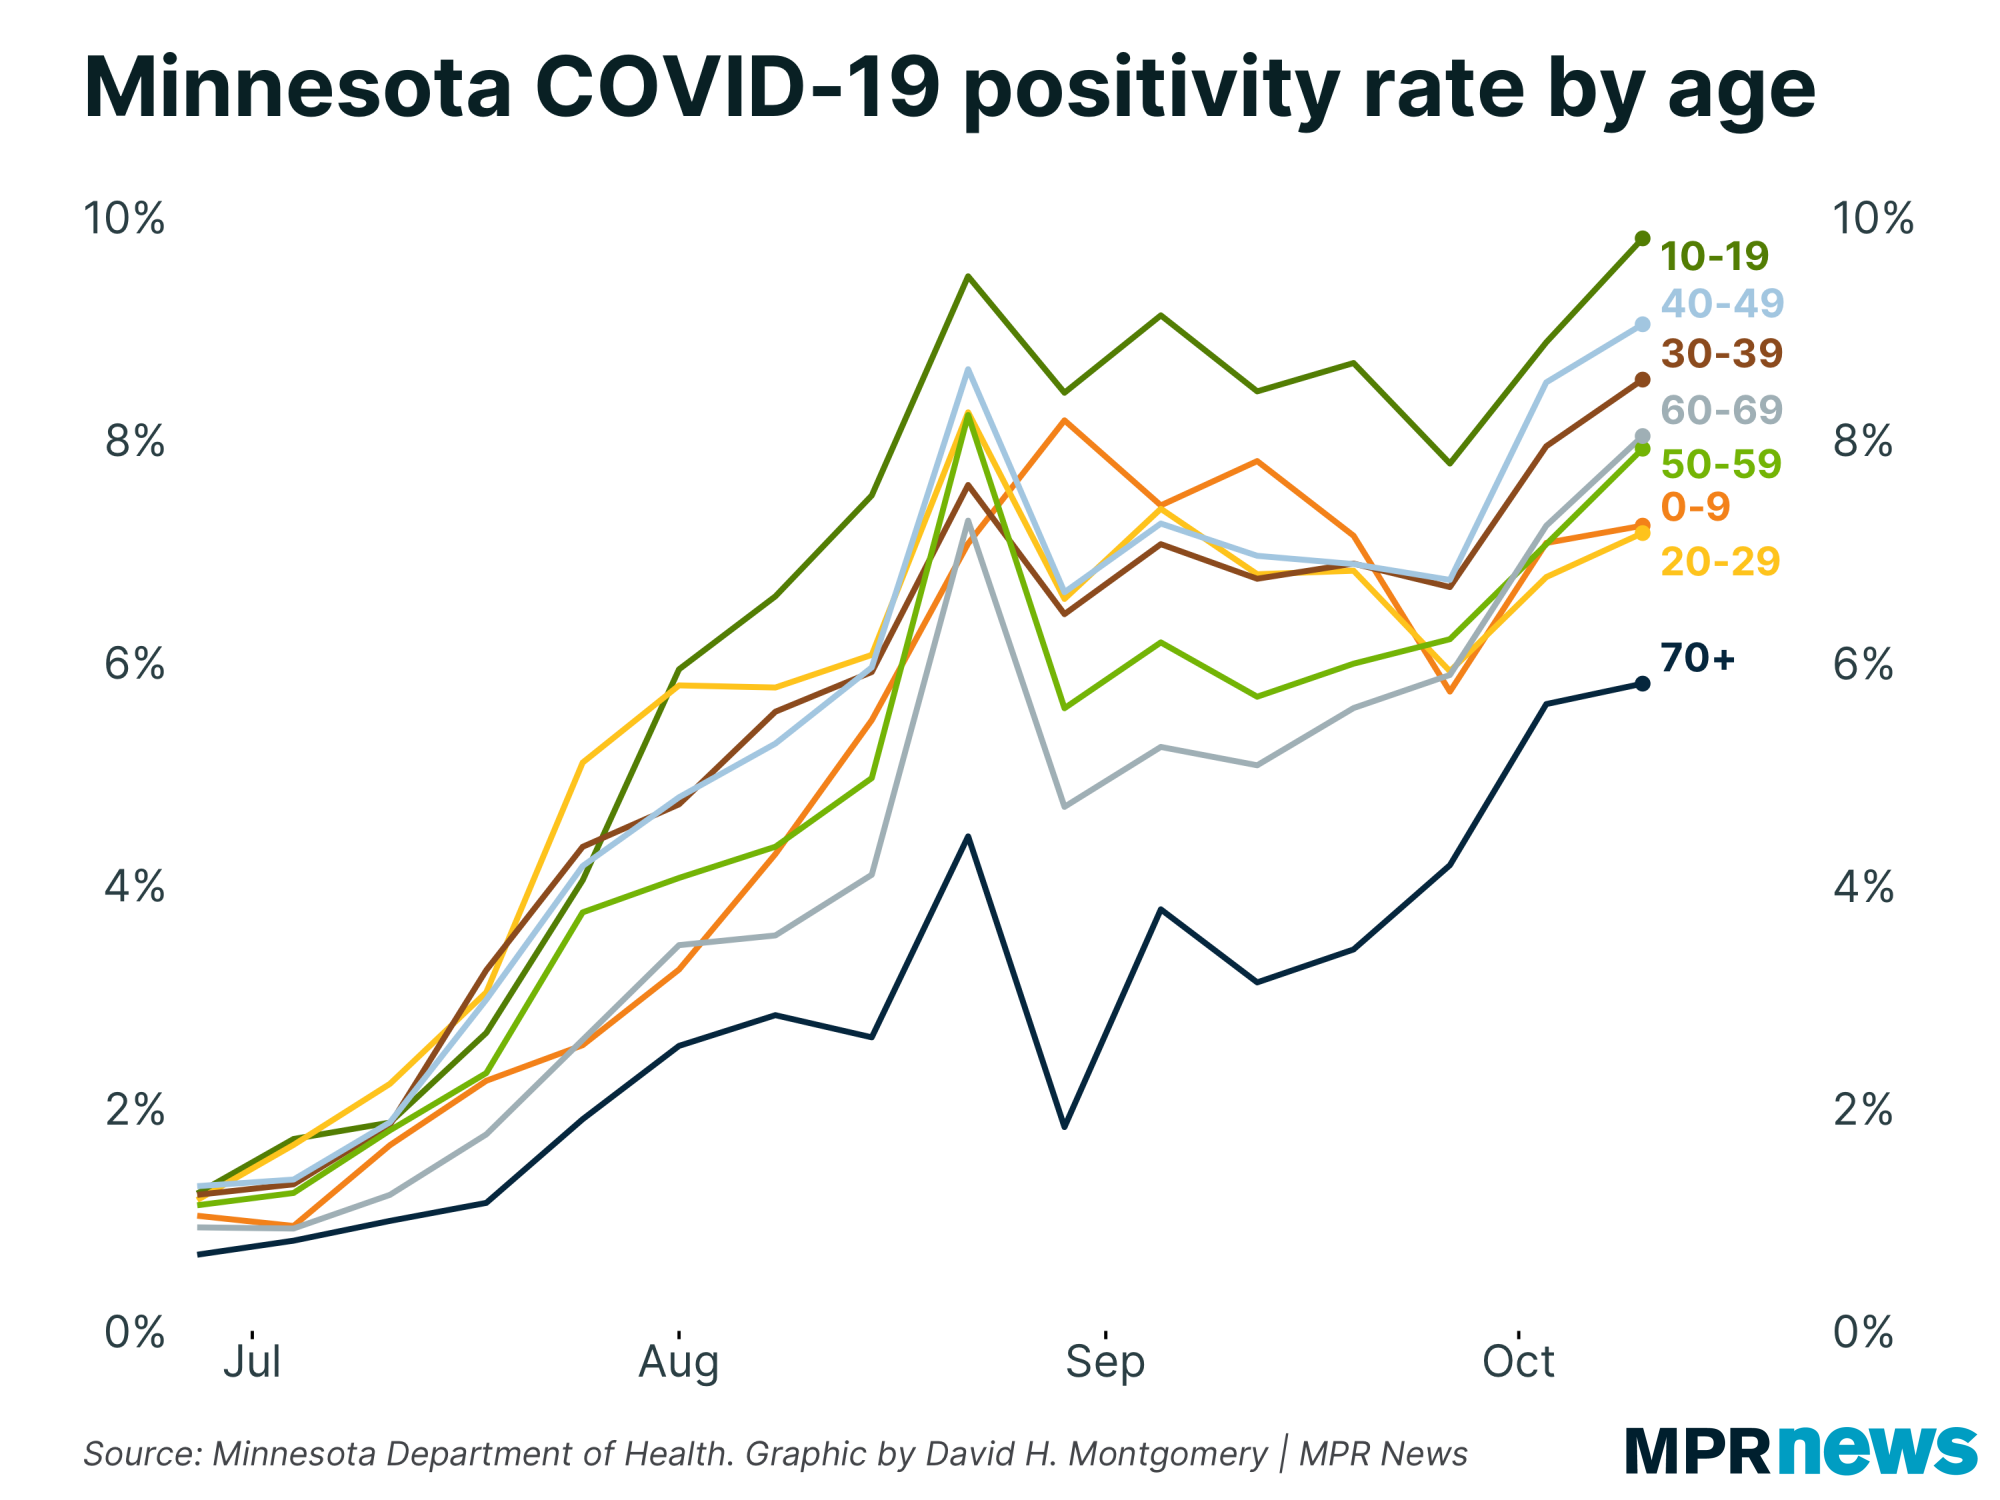 Graph of Minnesota COVID-19 positivity rate by age